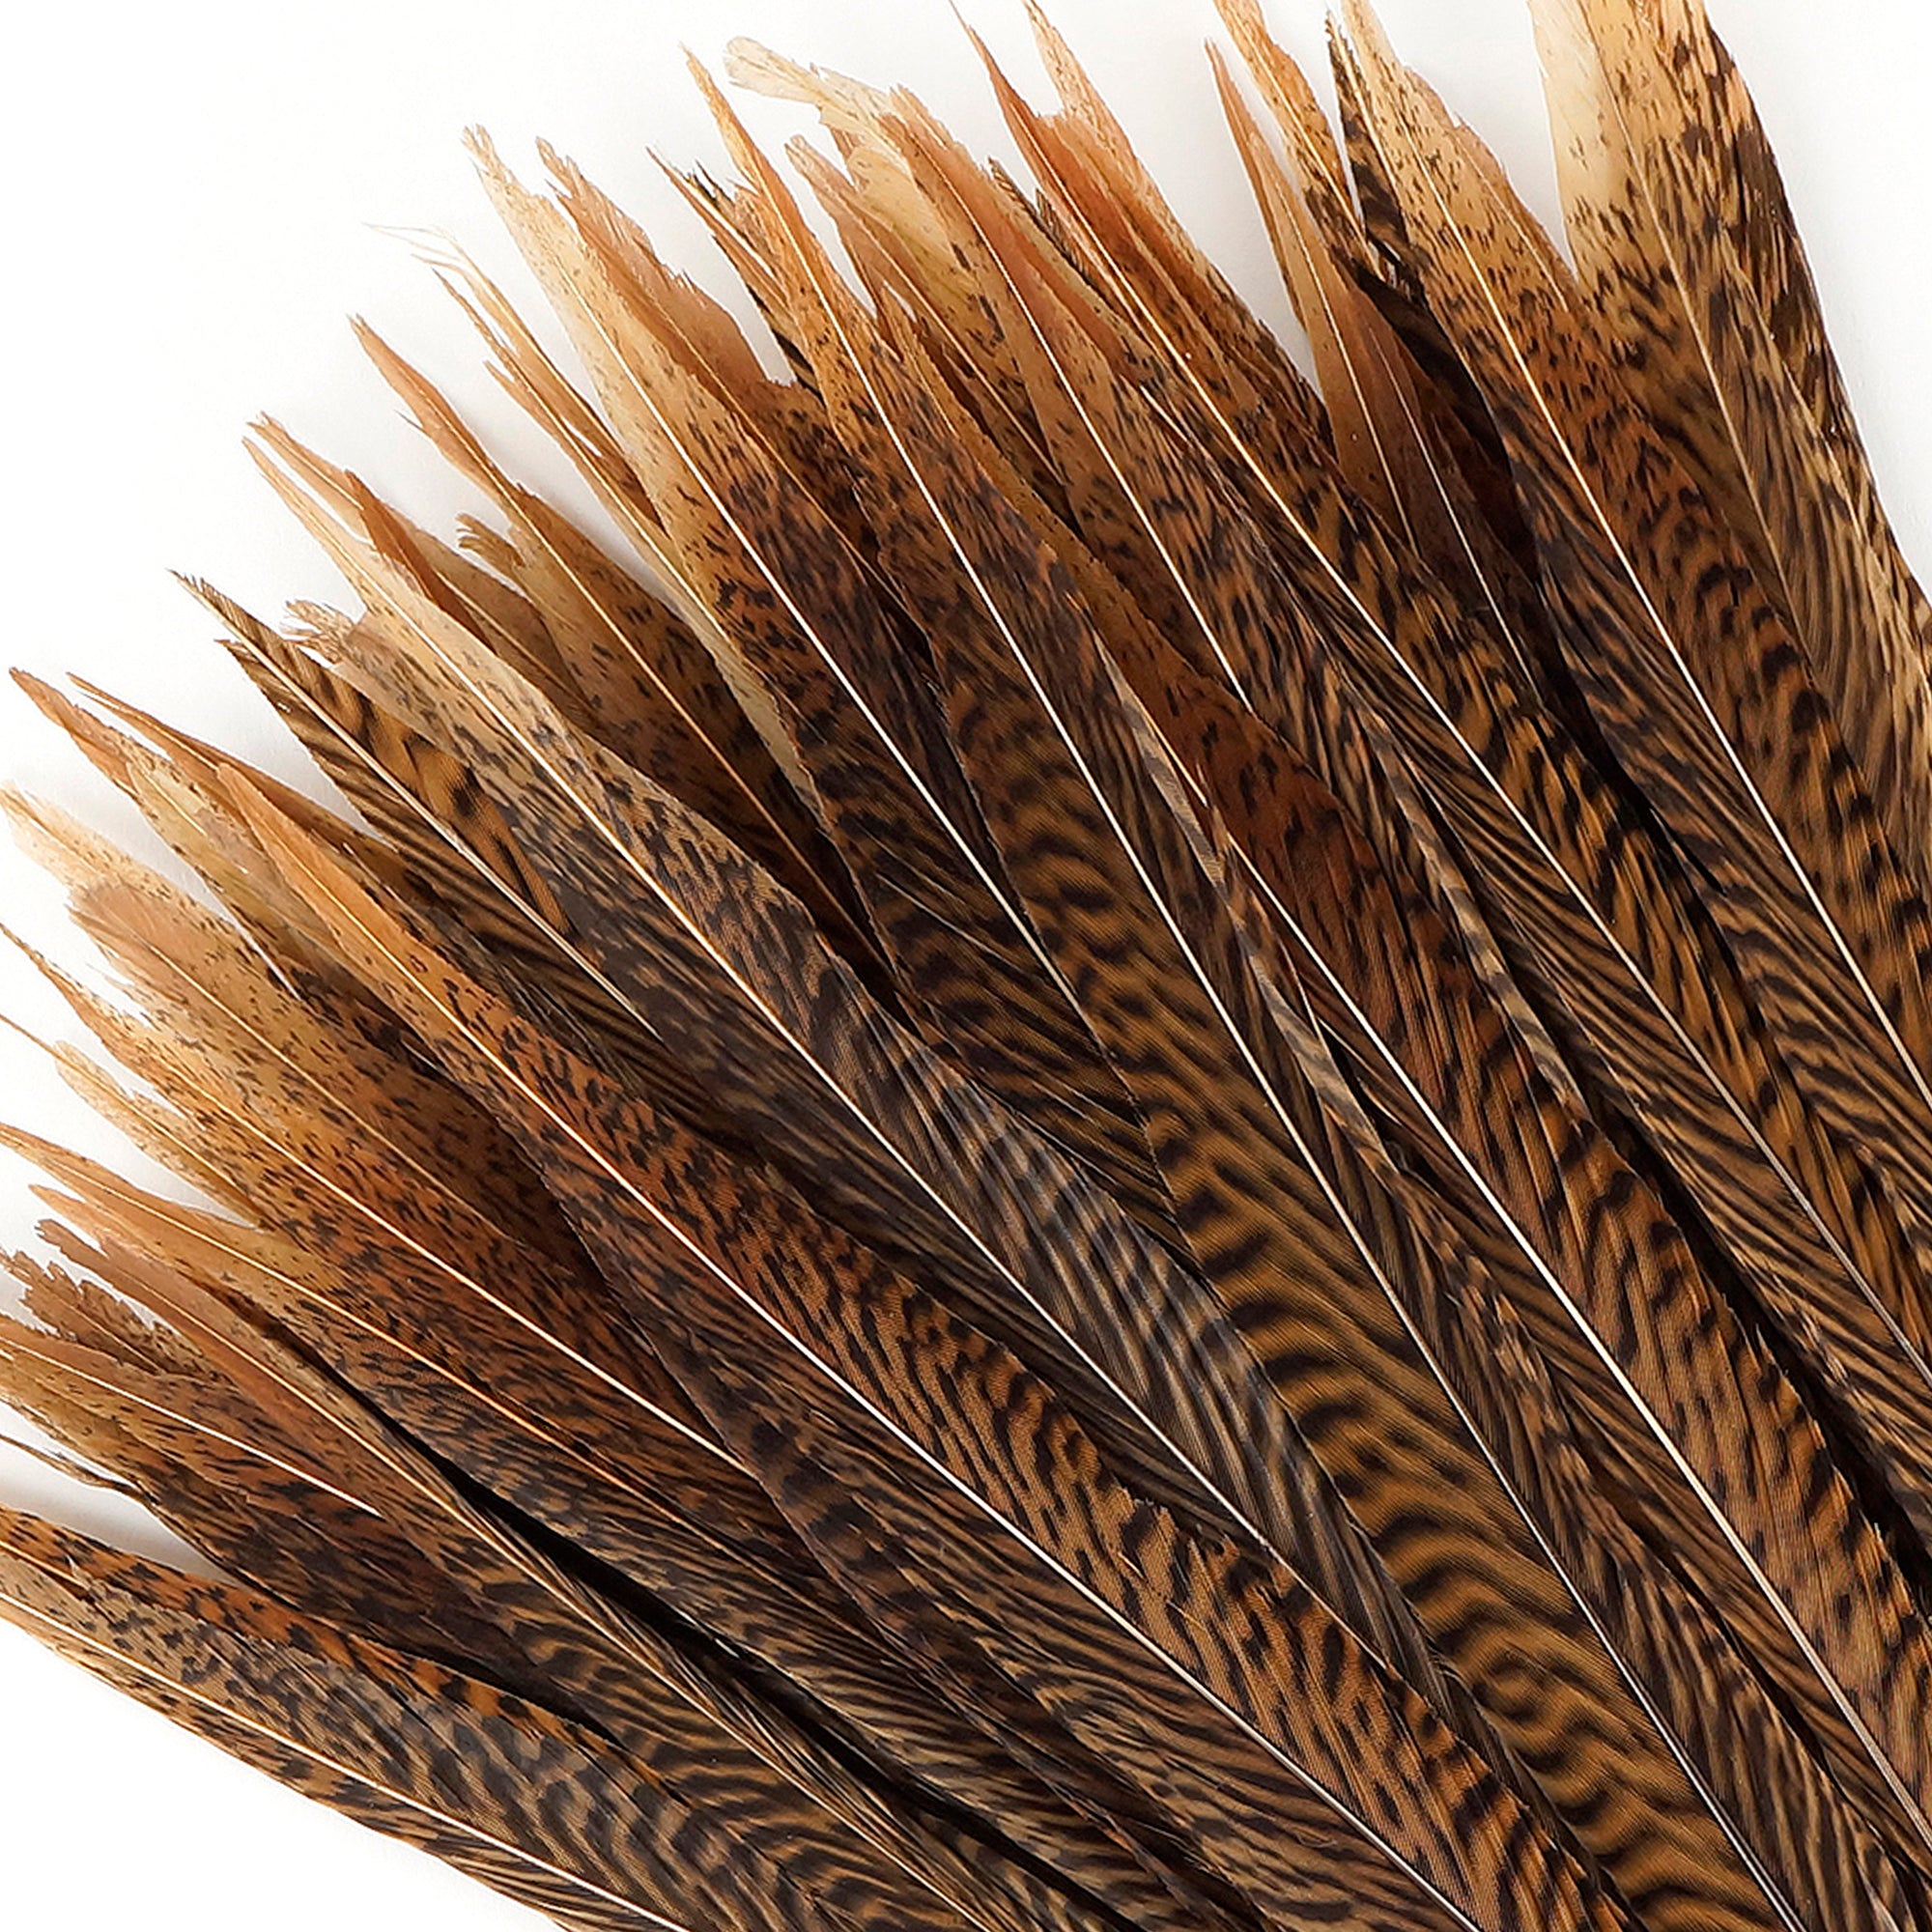 Small Pheasant Feathers for Crafts Bulk Wholesale 60pcs